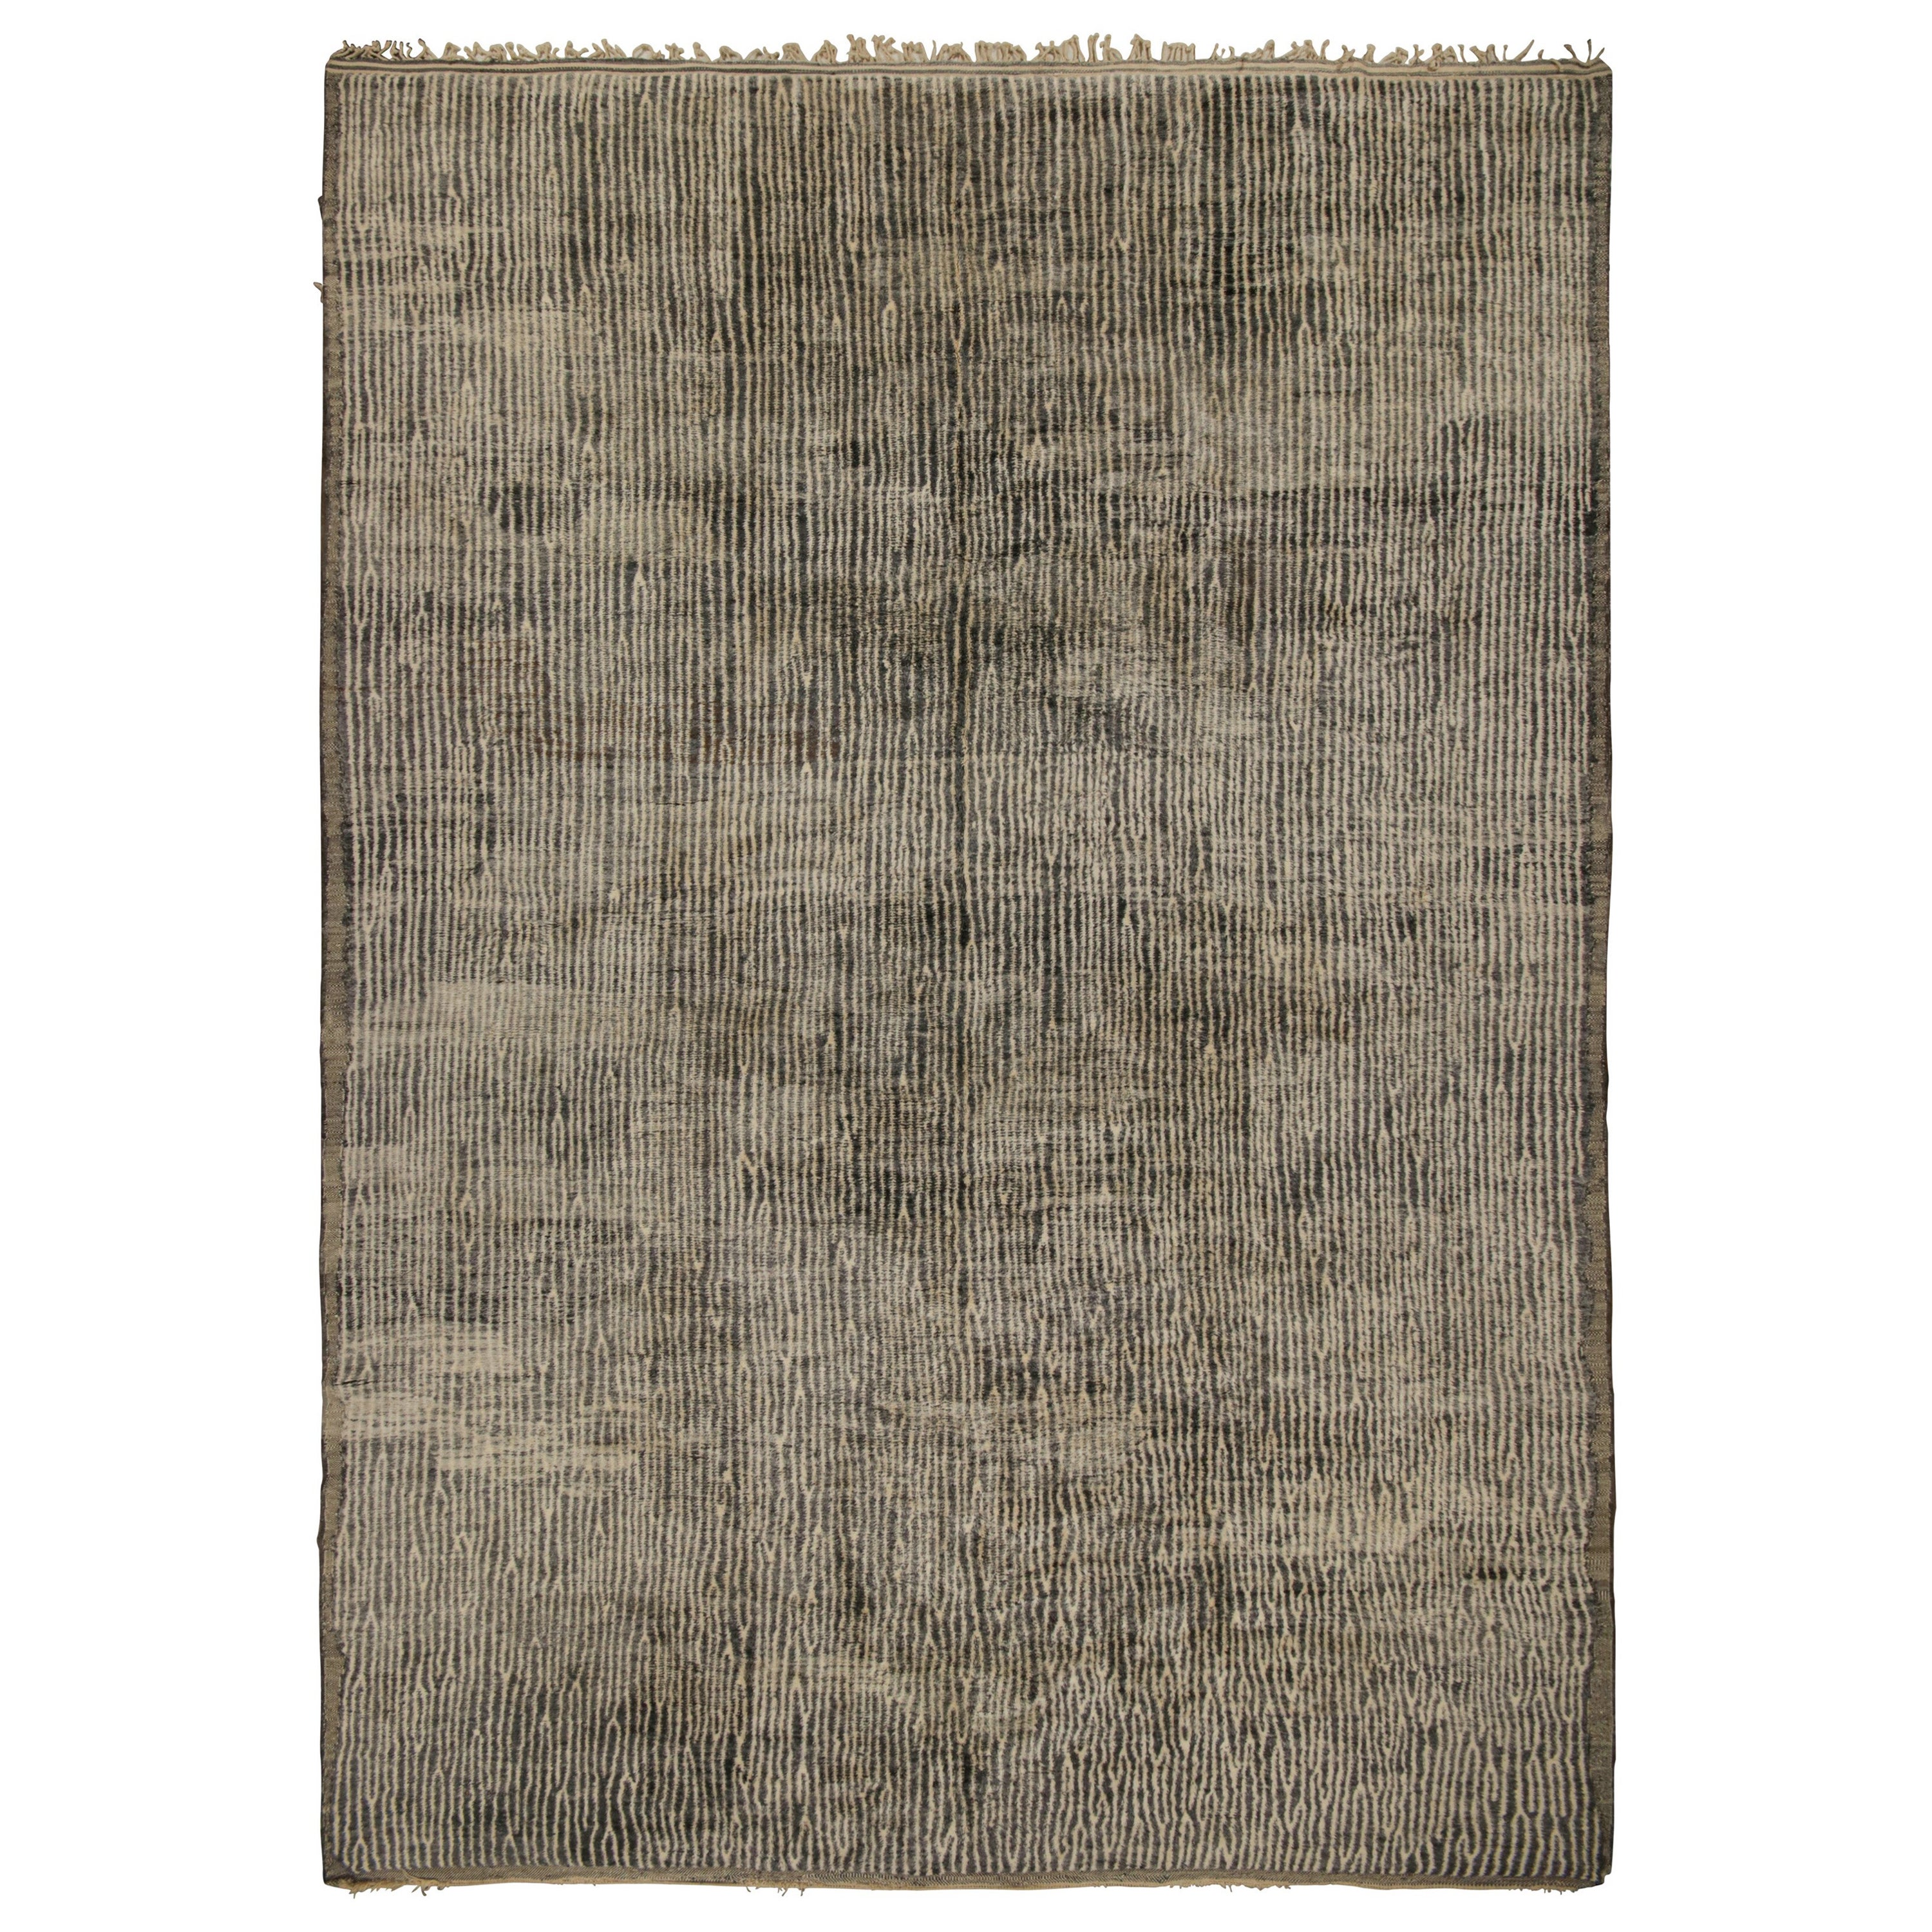 Rug & Kilim’s Oversized Moroccan Rug with Gray and Beige Stripes in High Pile For Sale